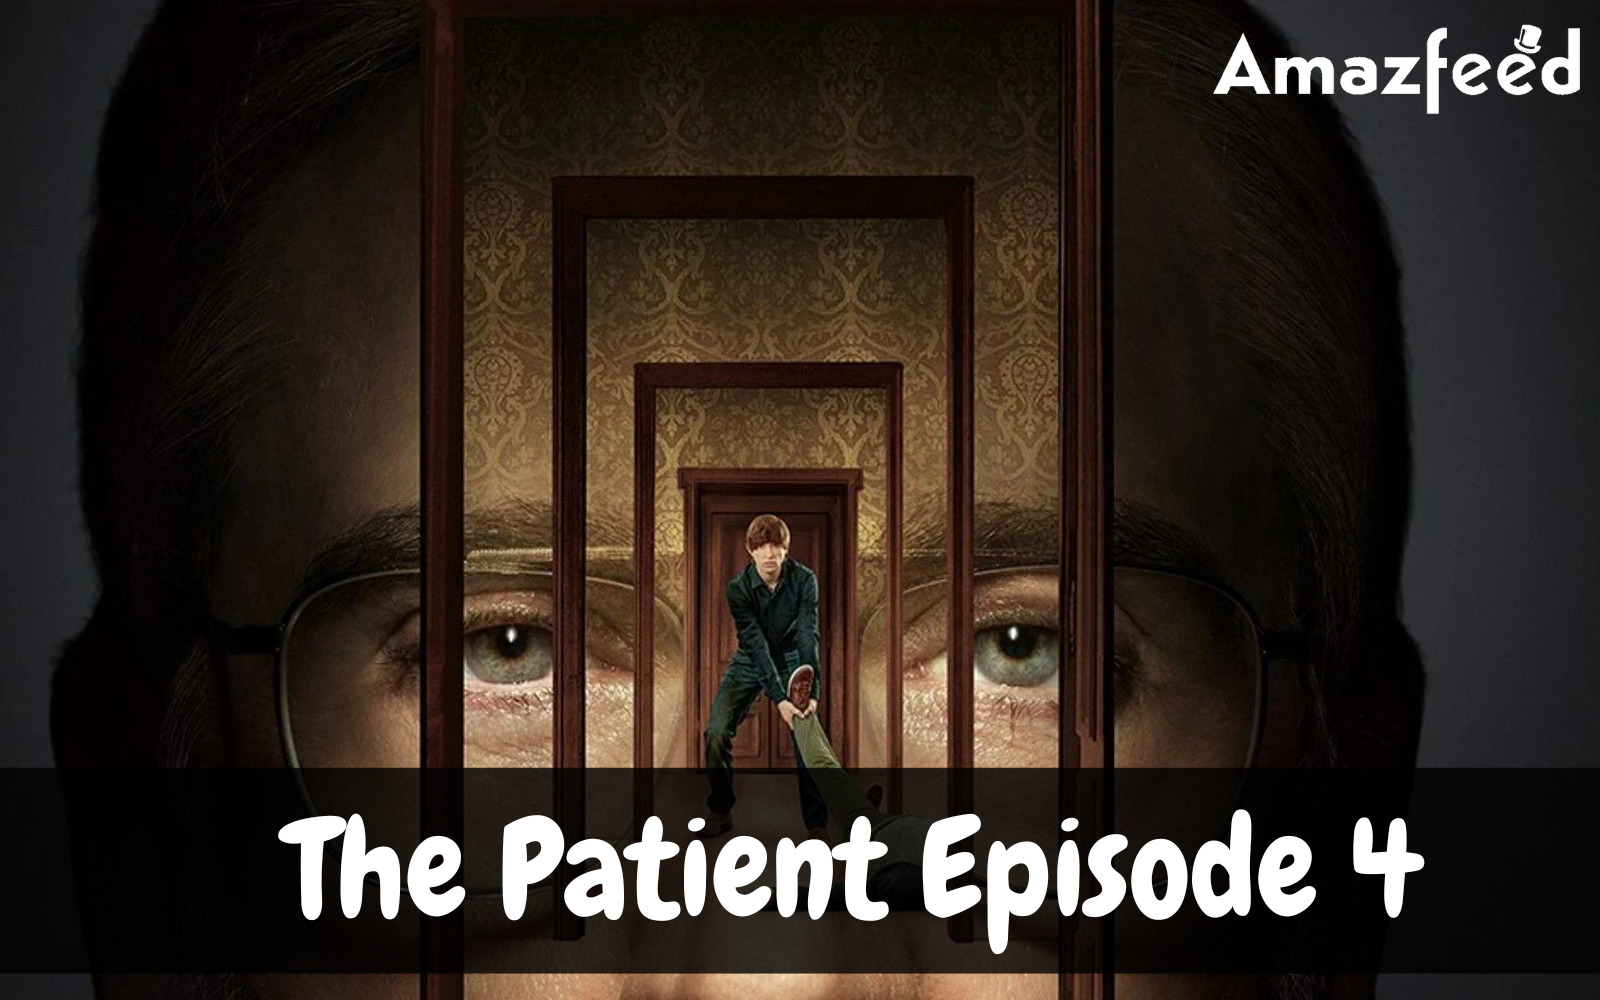 What Are The Patient Episode 4 Details Reviews